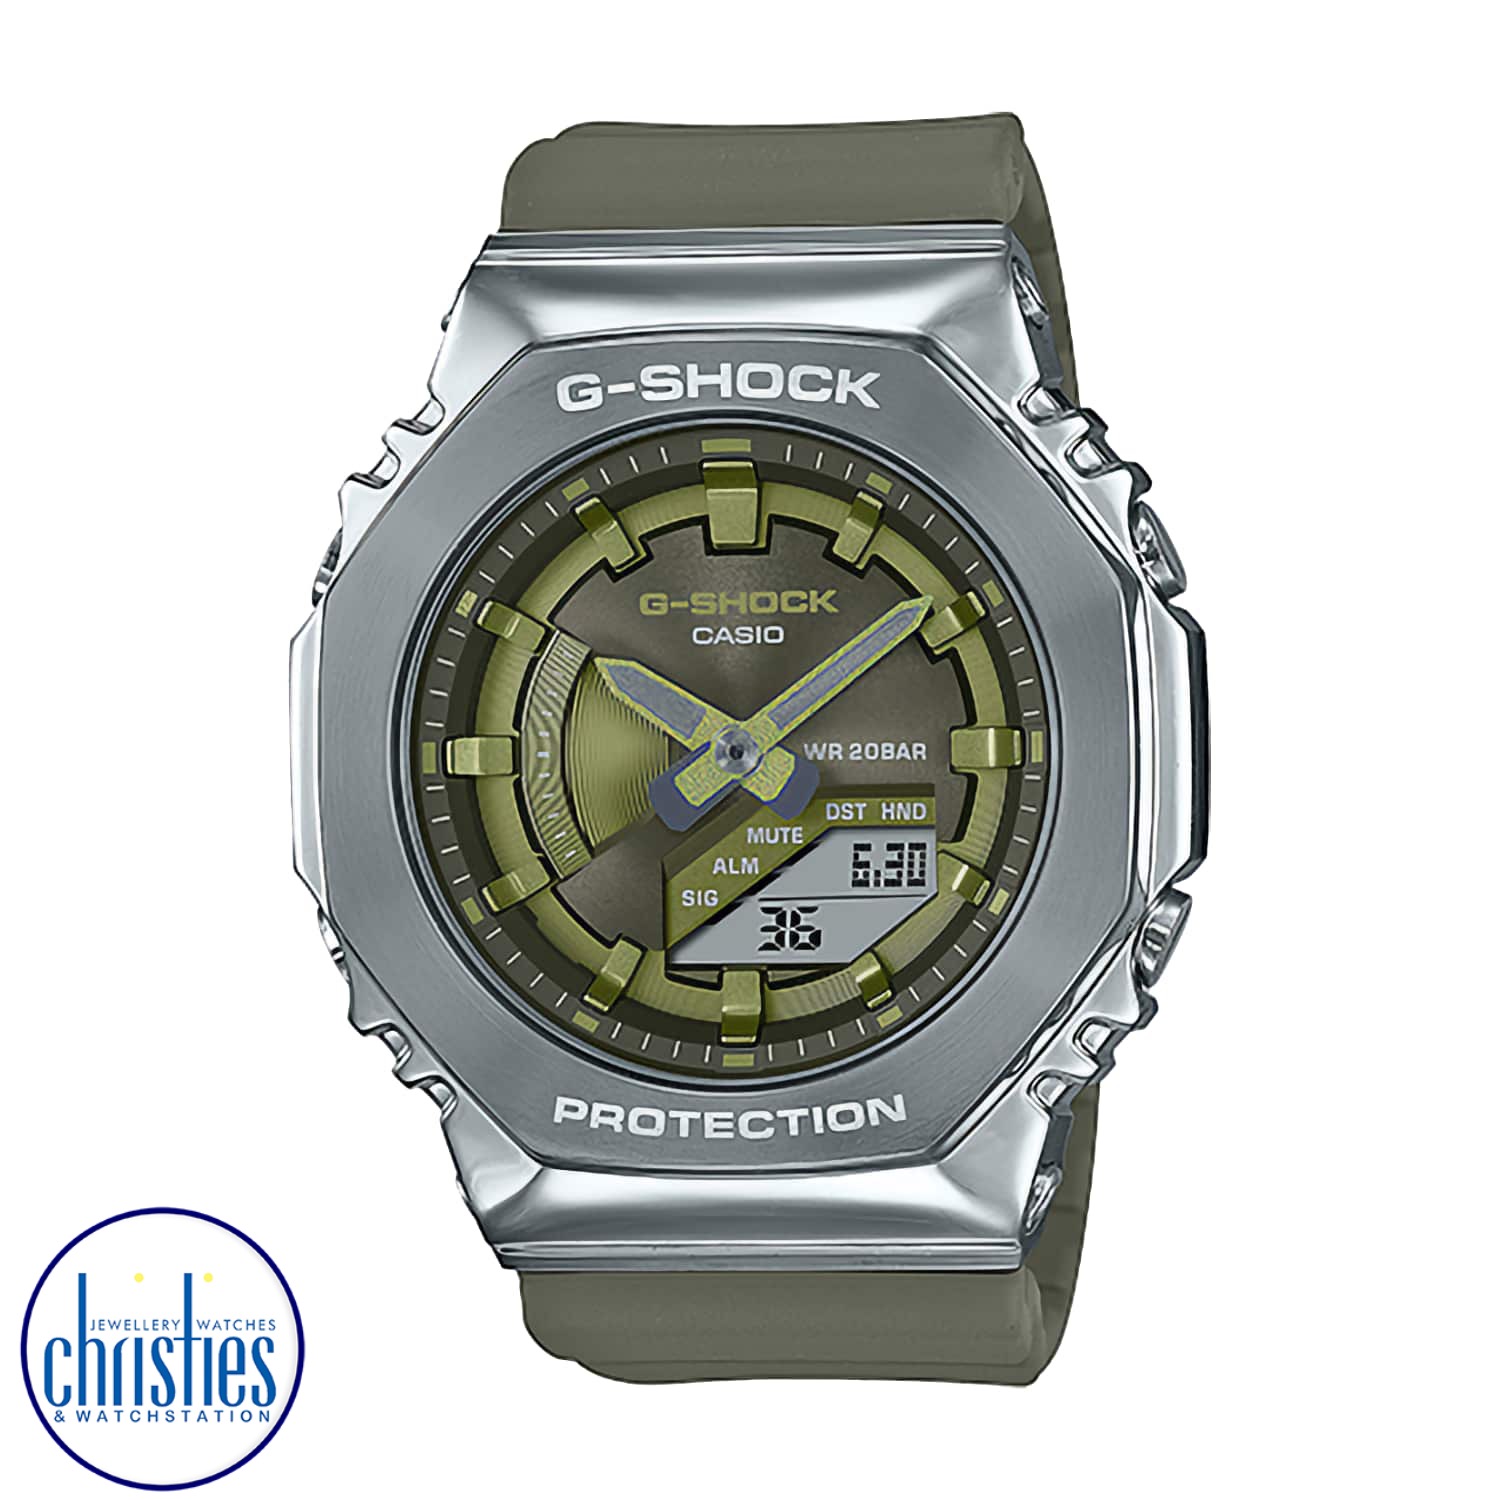 GMS2100-3A G-SHOCK Unisex Carbon Core Metal Clad Watch. Go slim, clean and bold with a mid-sized G-SHOCK in a metal-clad octagonal take on the original iconic design. Forged in stainless steel with rounded hairline finish, the strong bezel says super styl